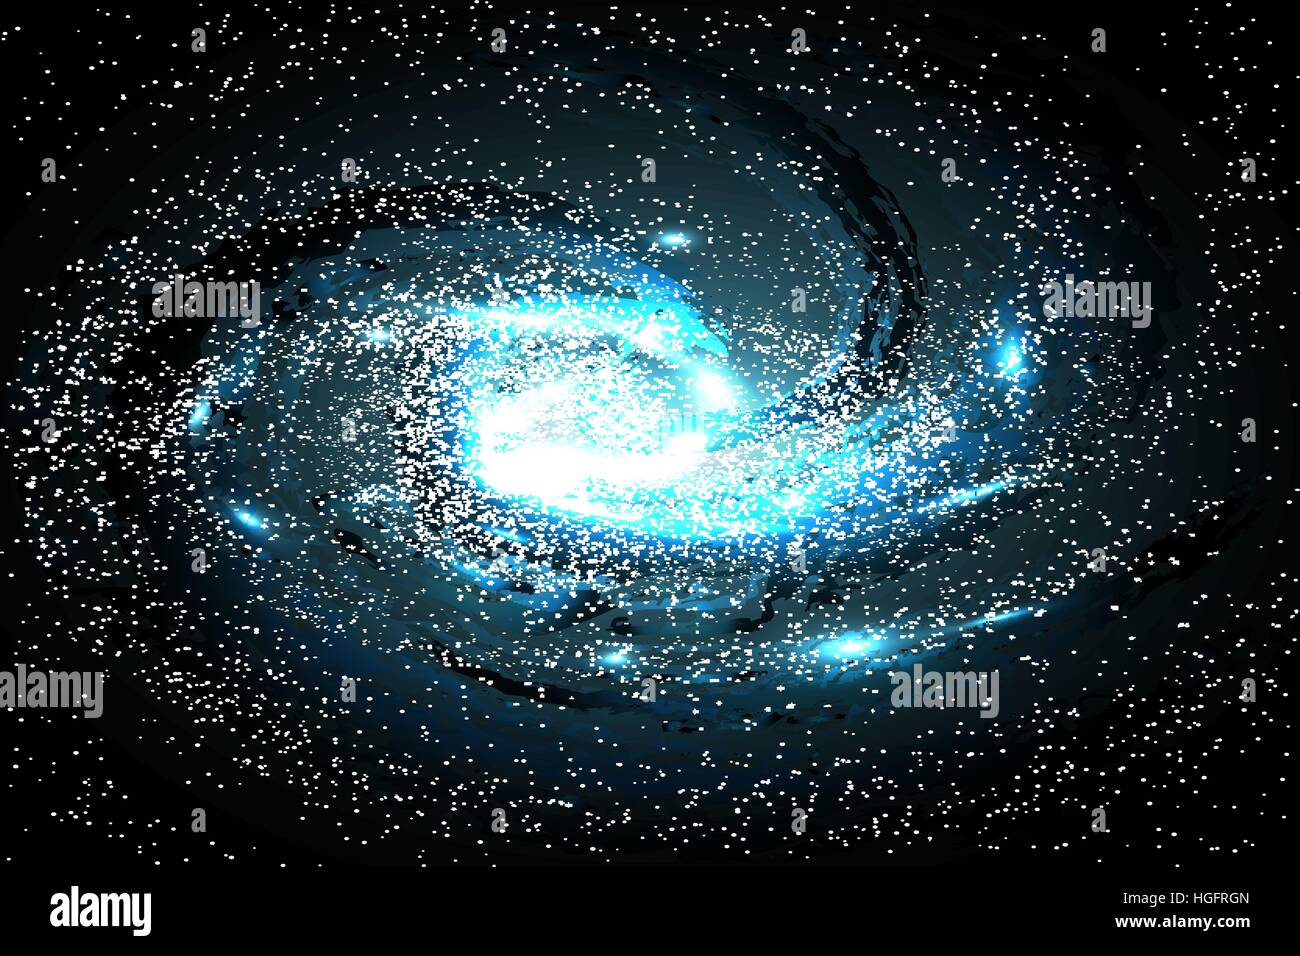 Image of galaxies, nebulae, cosmos, and effect tunnel spiral galaxy background vector illustration Stock Vector